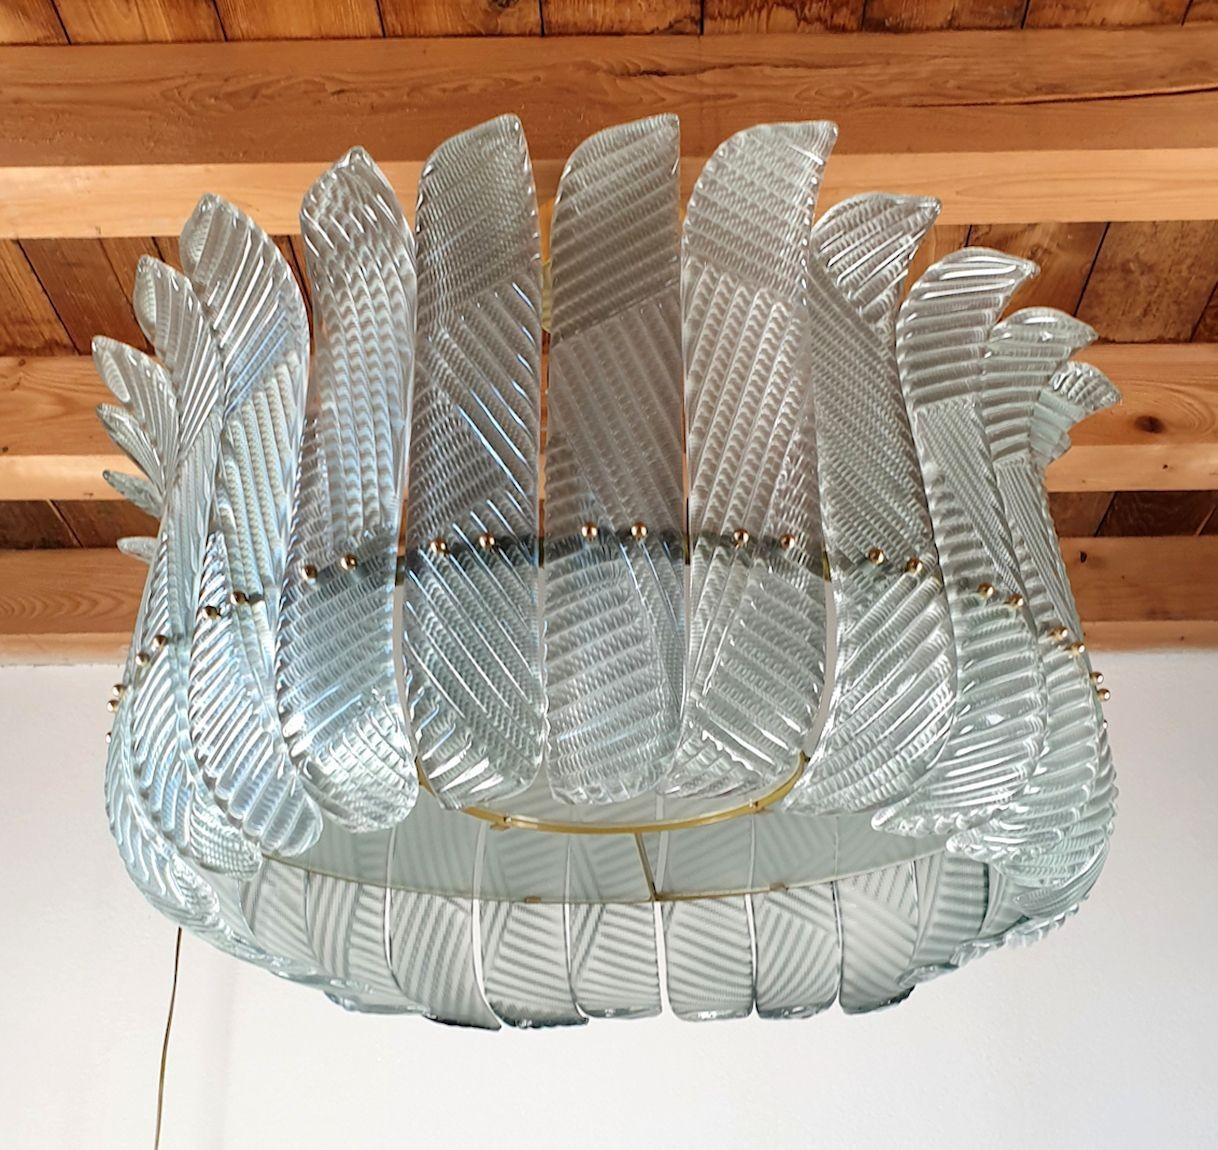 Large Mid Century Modern Murano glass Drum chandelier, in the manner of Vistosi. Italy 1980s
The Murano vintage chandelier has a brass canopy but is almost a flush mount light: remains very close to the ceiling.
It's made of light green textured